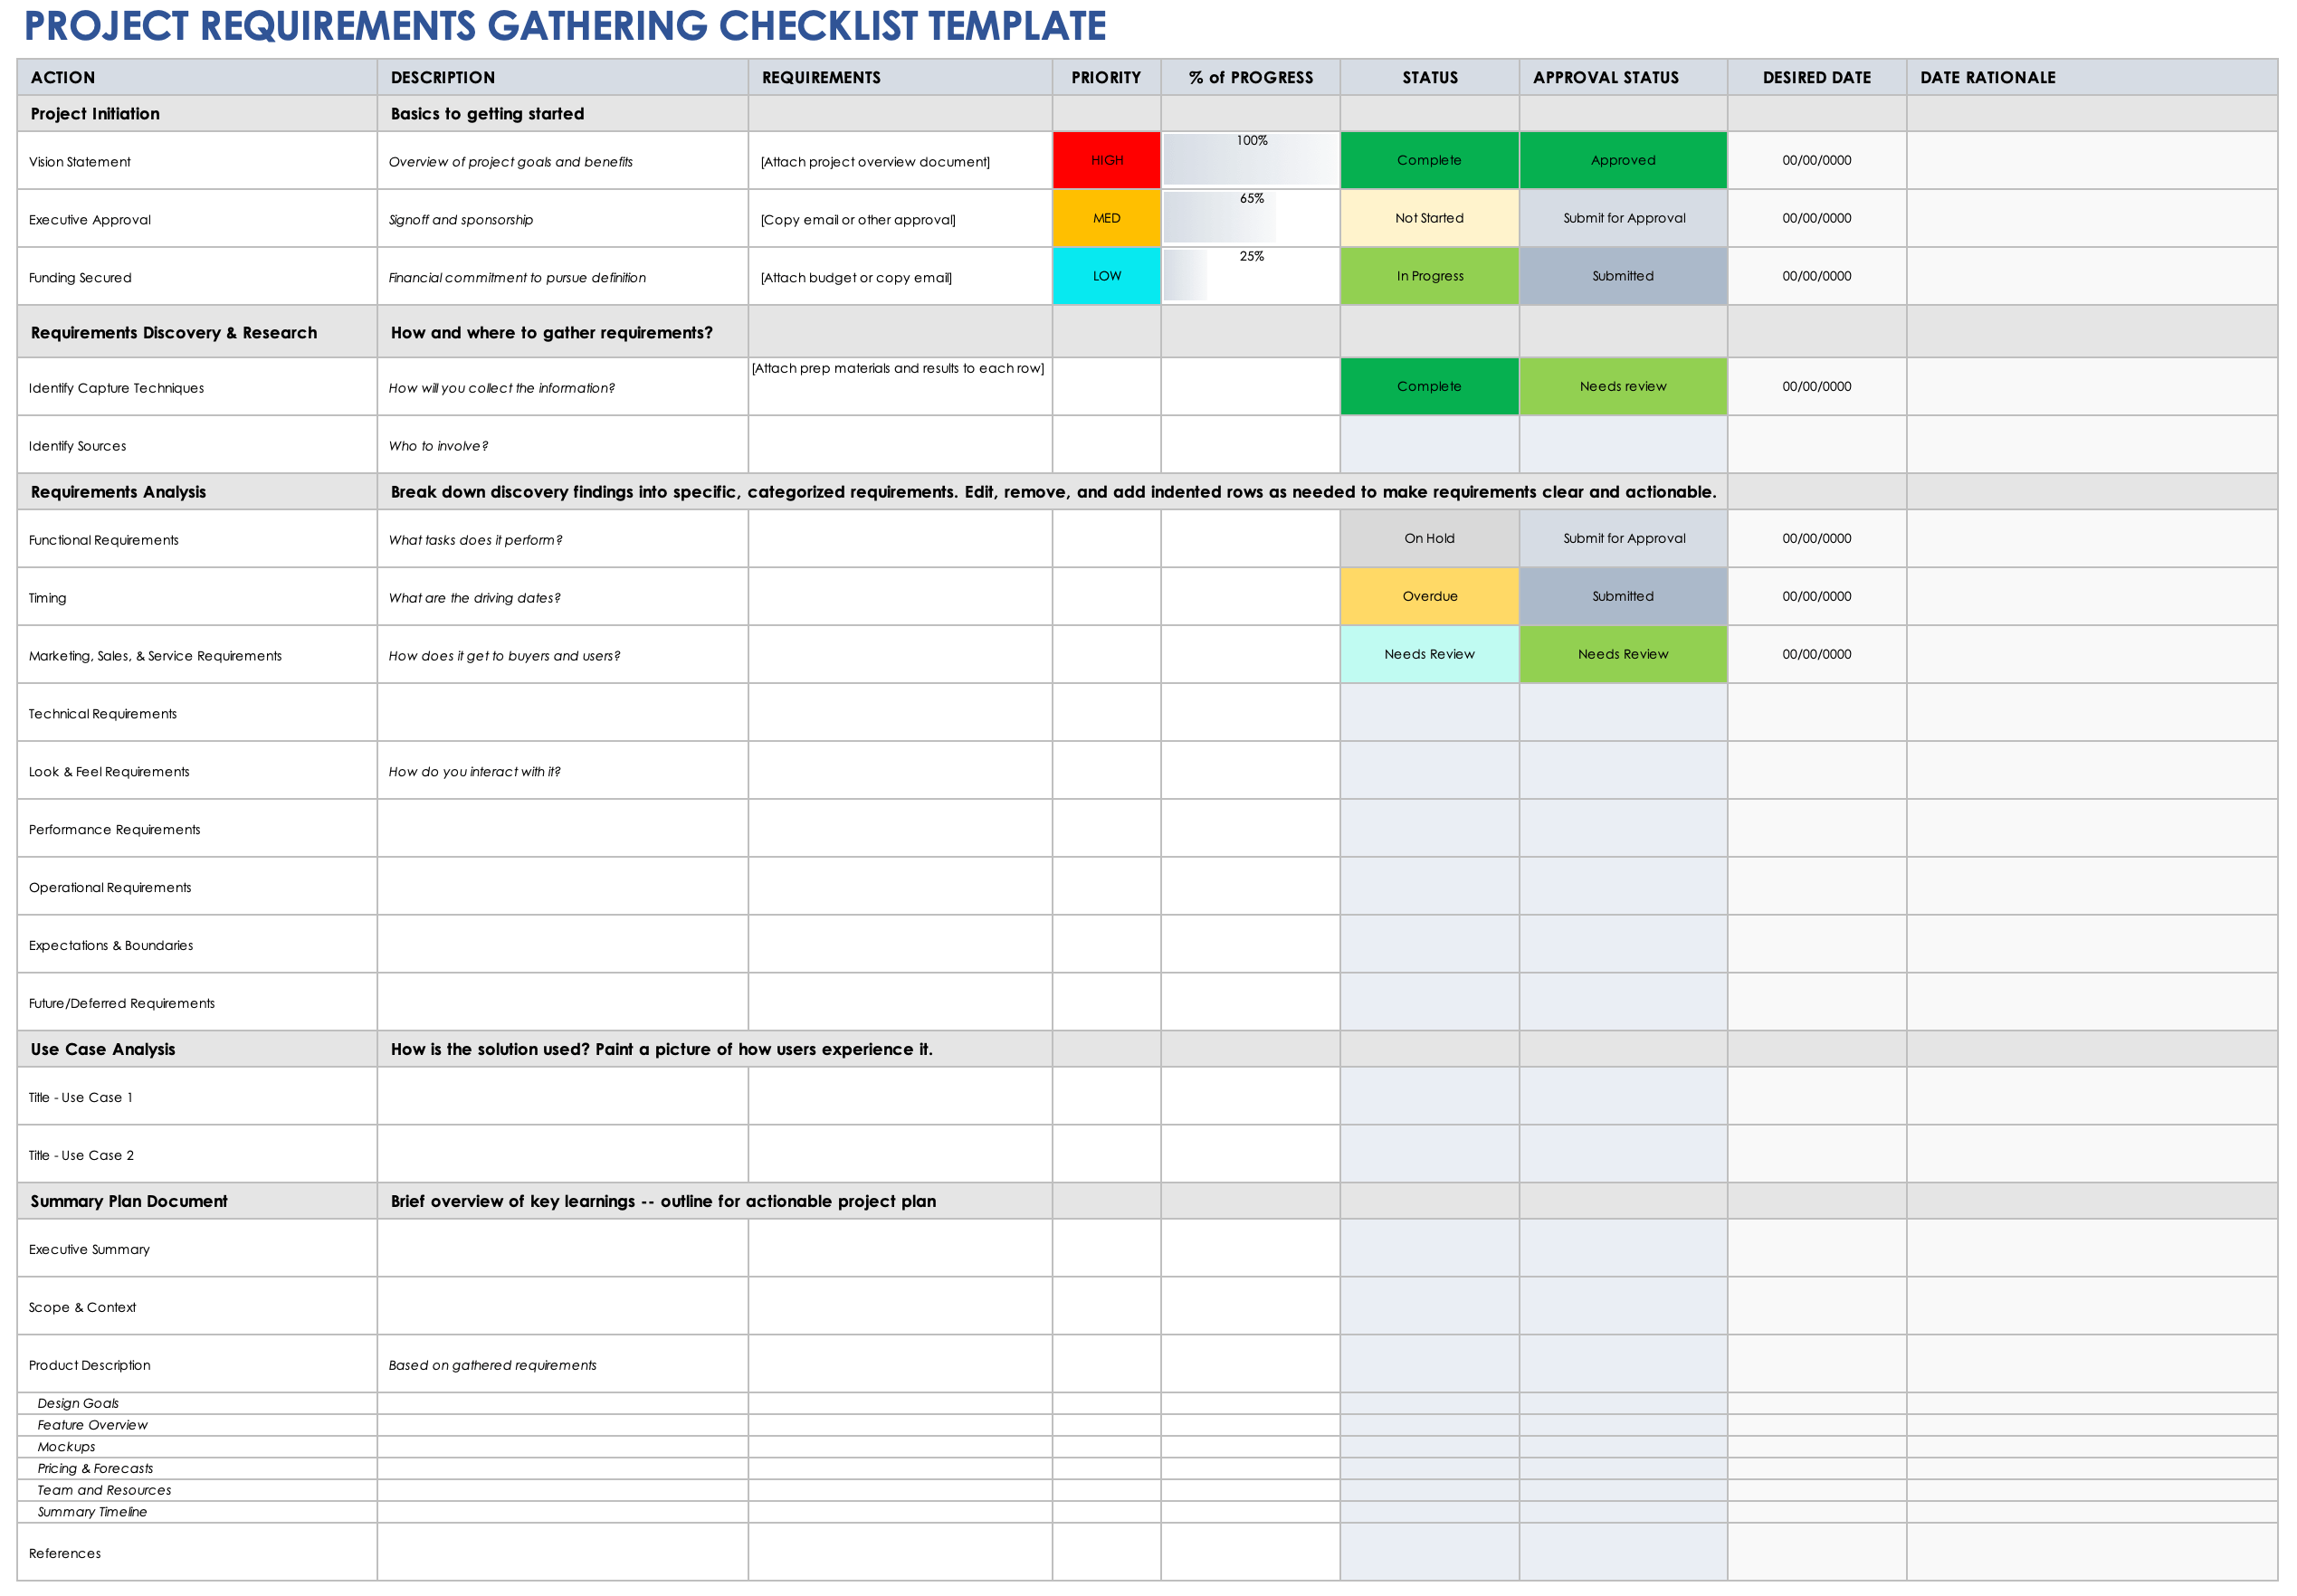 Project-Requirements Gathering Checklist Template